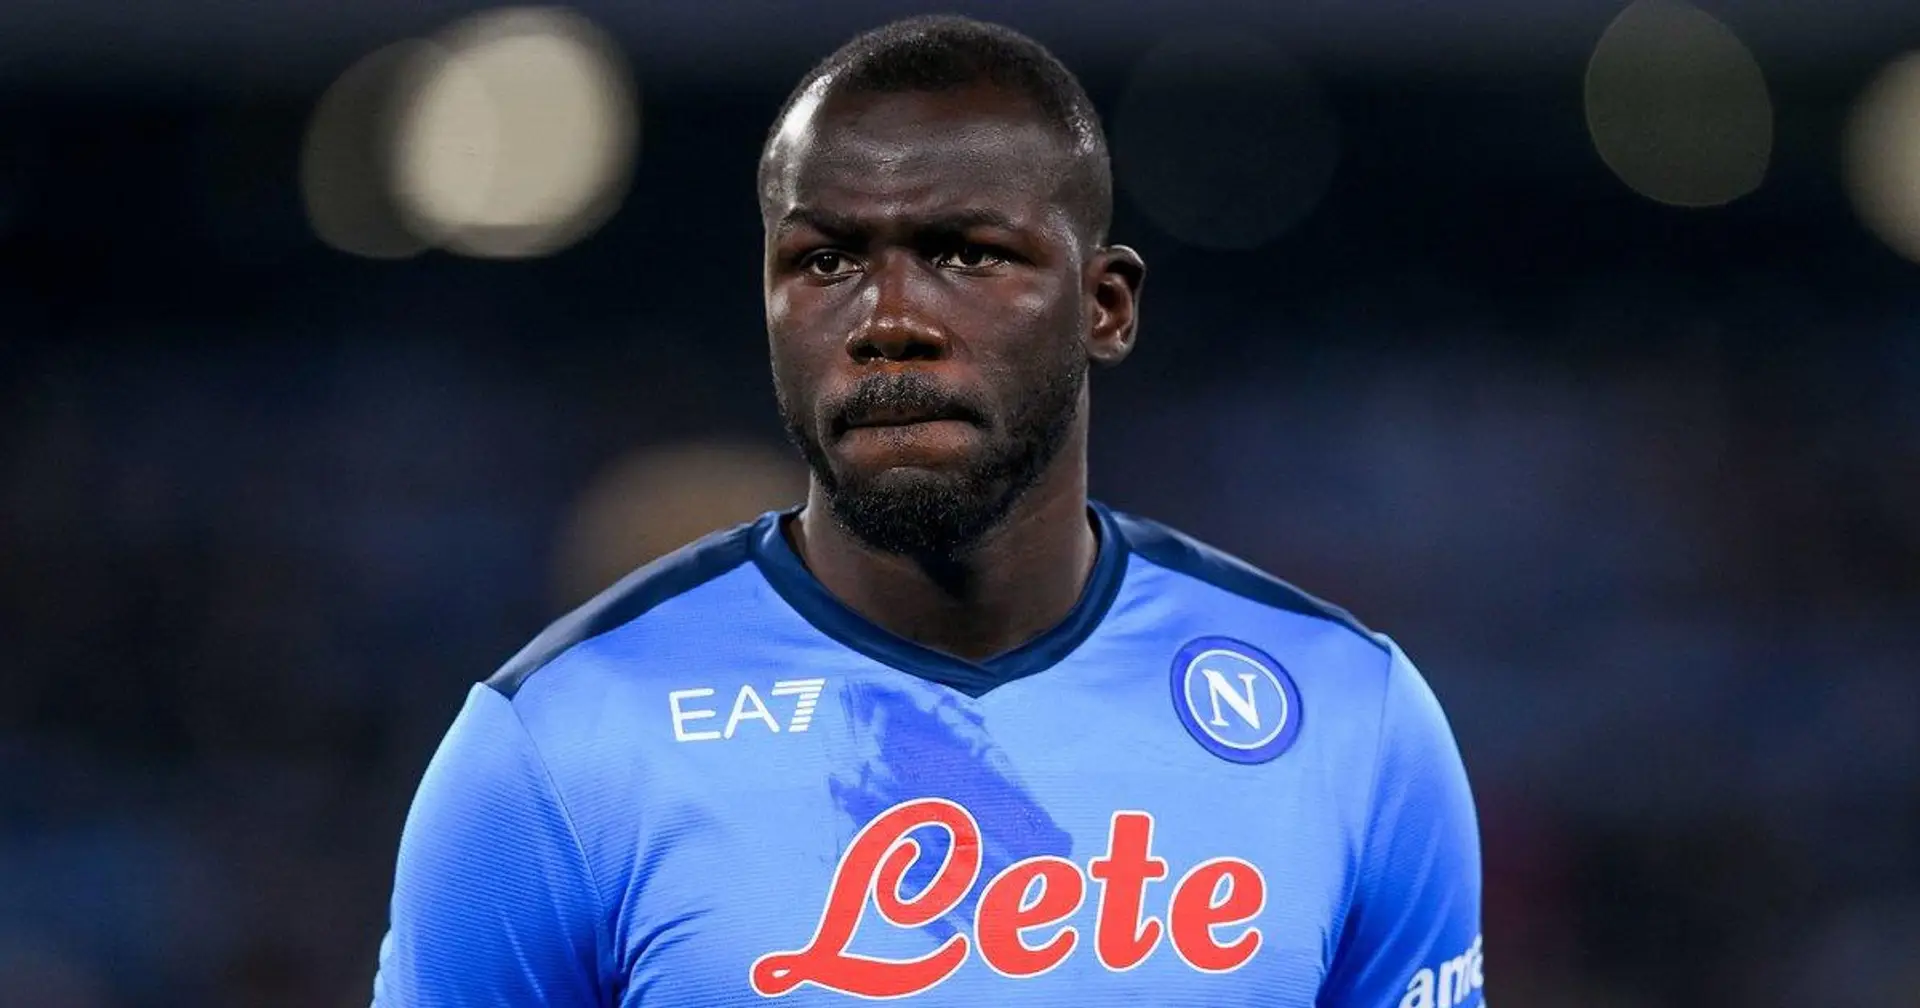 Revealed: 2 recent developments that push Koulibaly closer to Barcelona